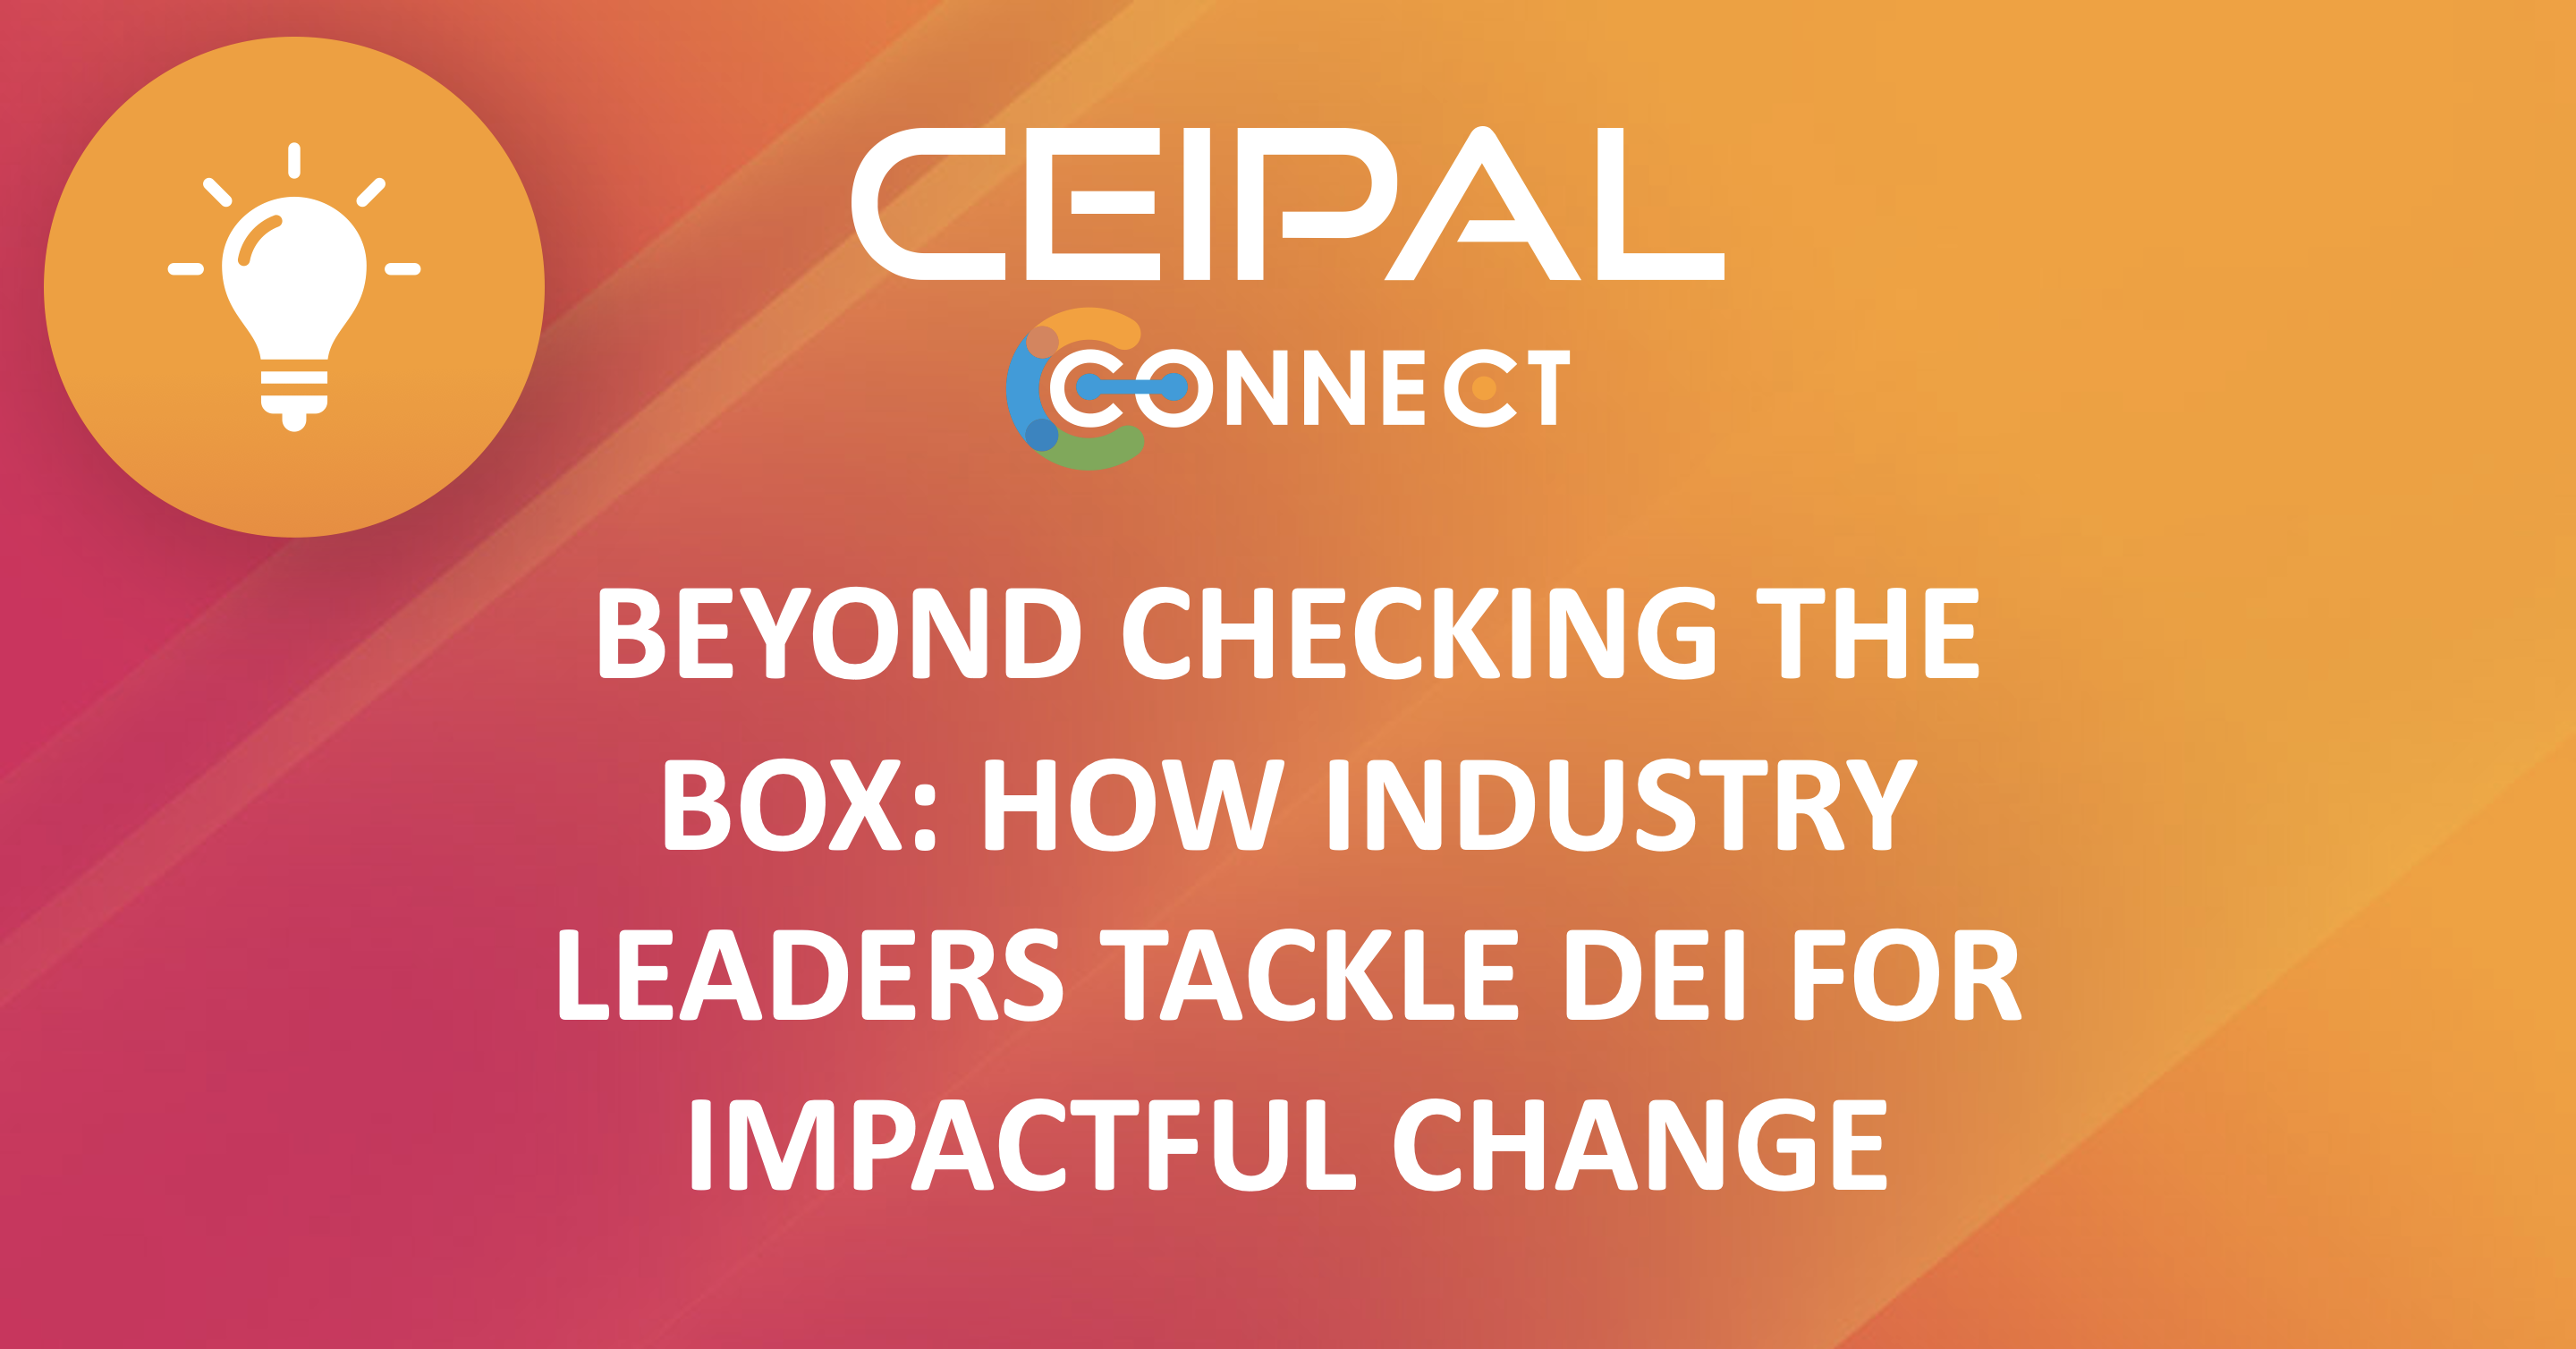 Beyond checking the box: How industry leaders tackle DEI for impactful change!